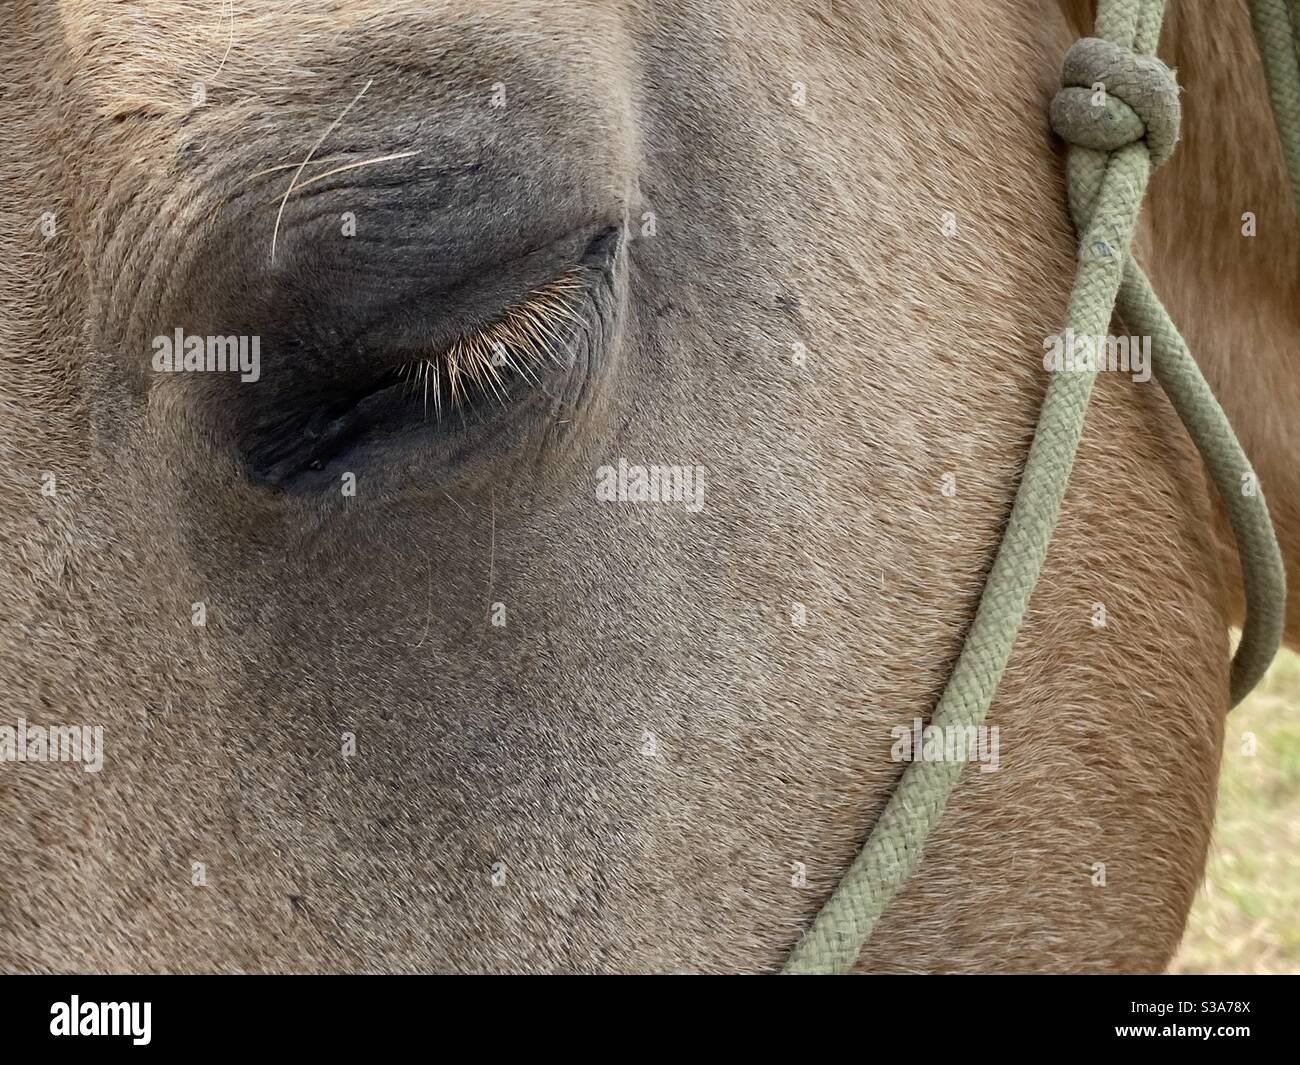 Closeup of a horse eye closed with long lashes Stock Photo